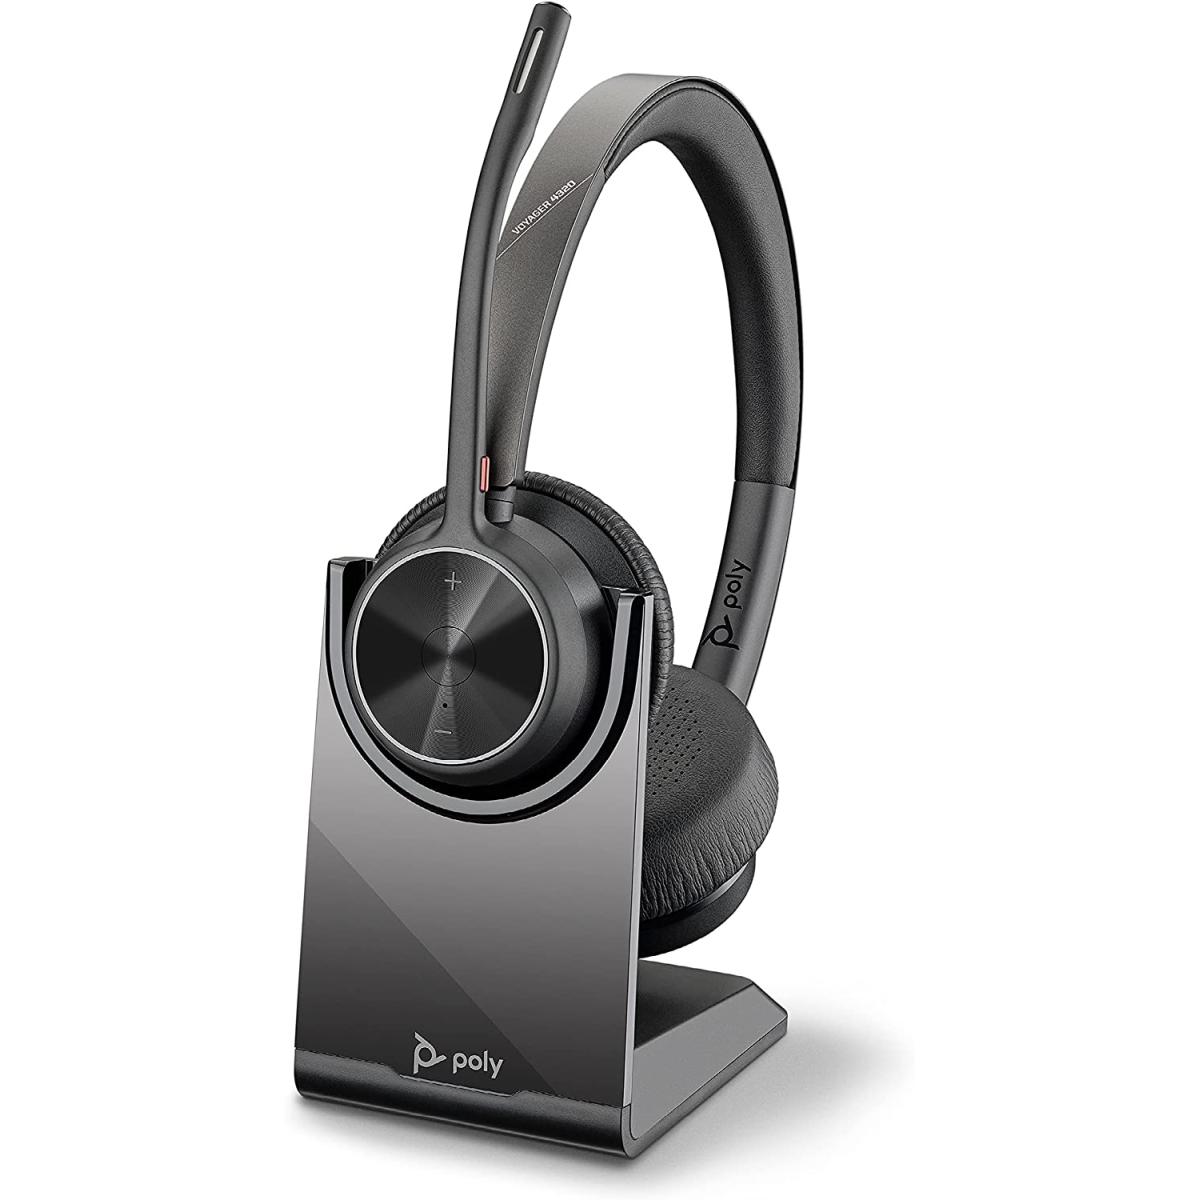 Ploy Voyager 4320 UC Wireless Headset with Charge Stand